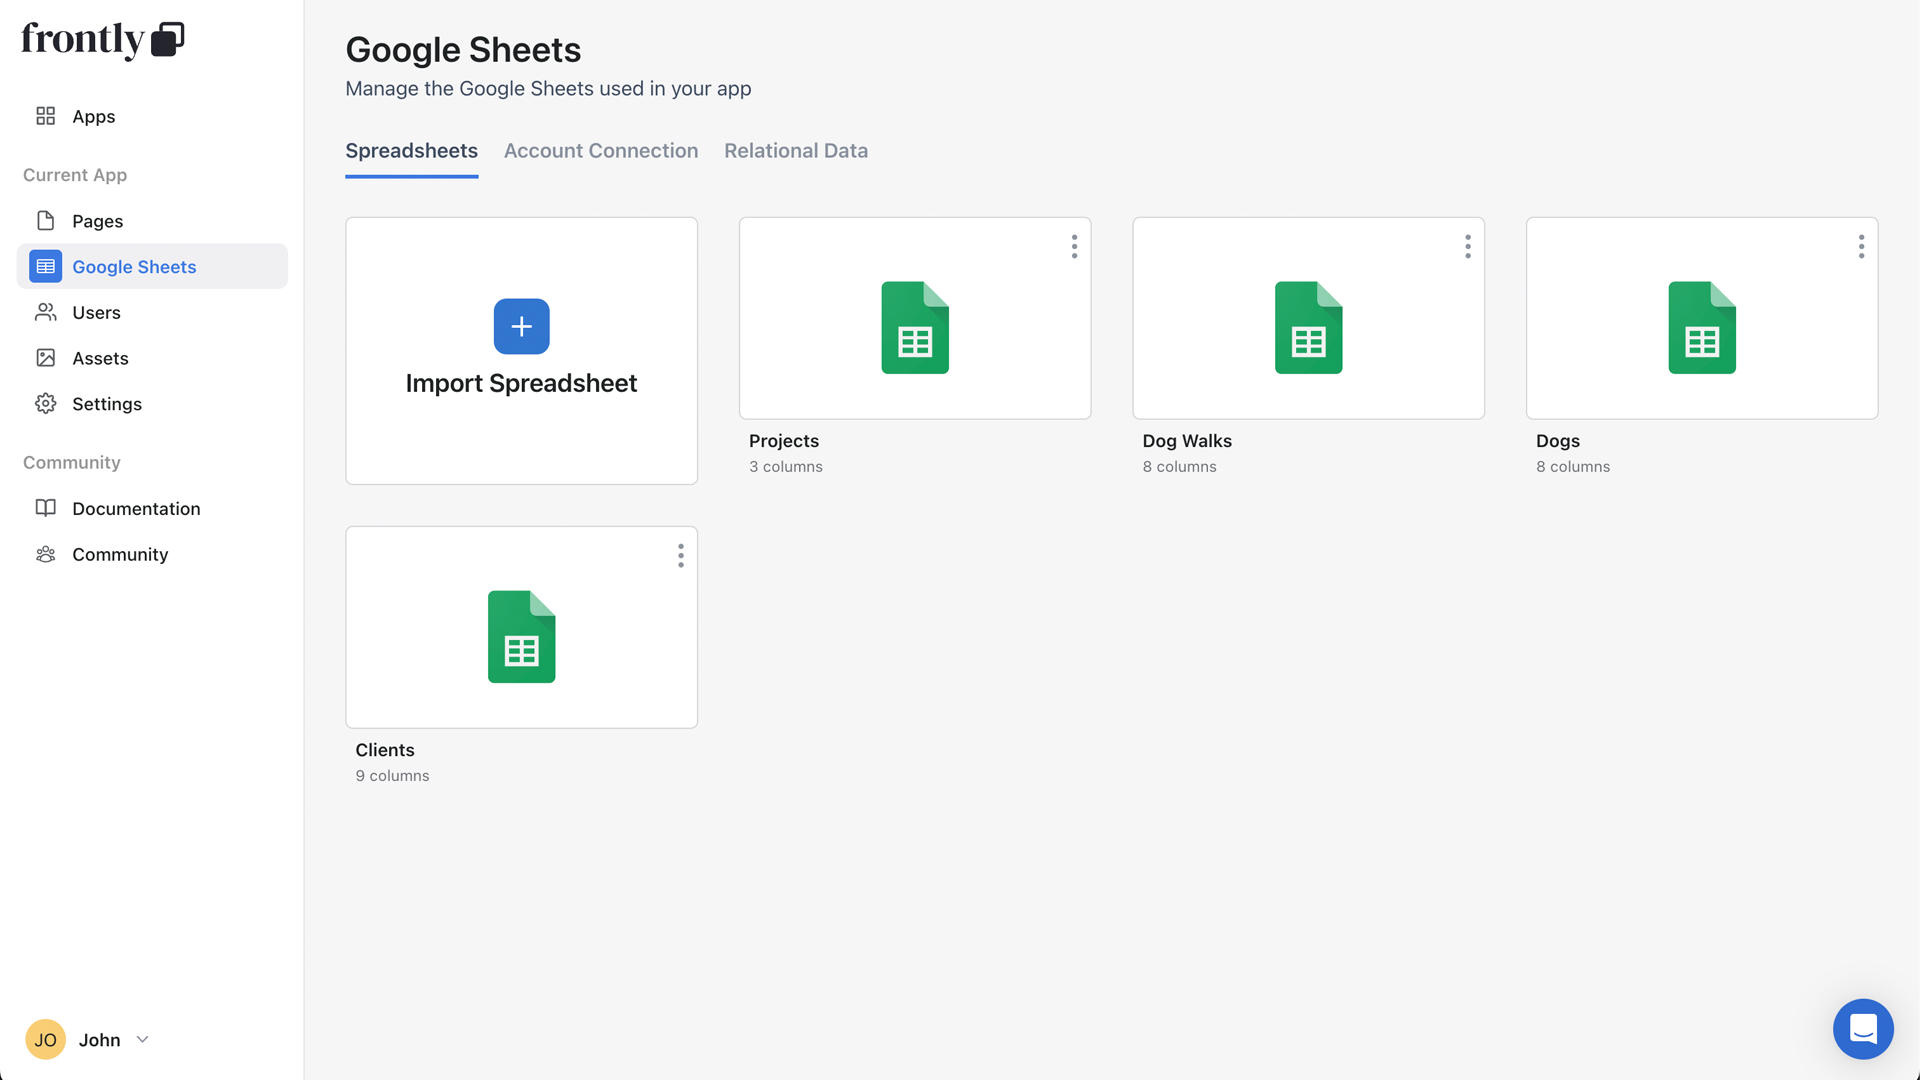 Connect Google Sheets